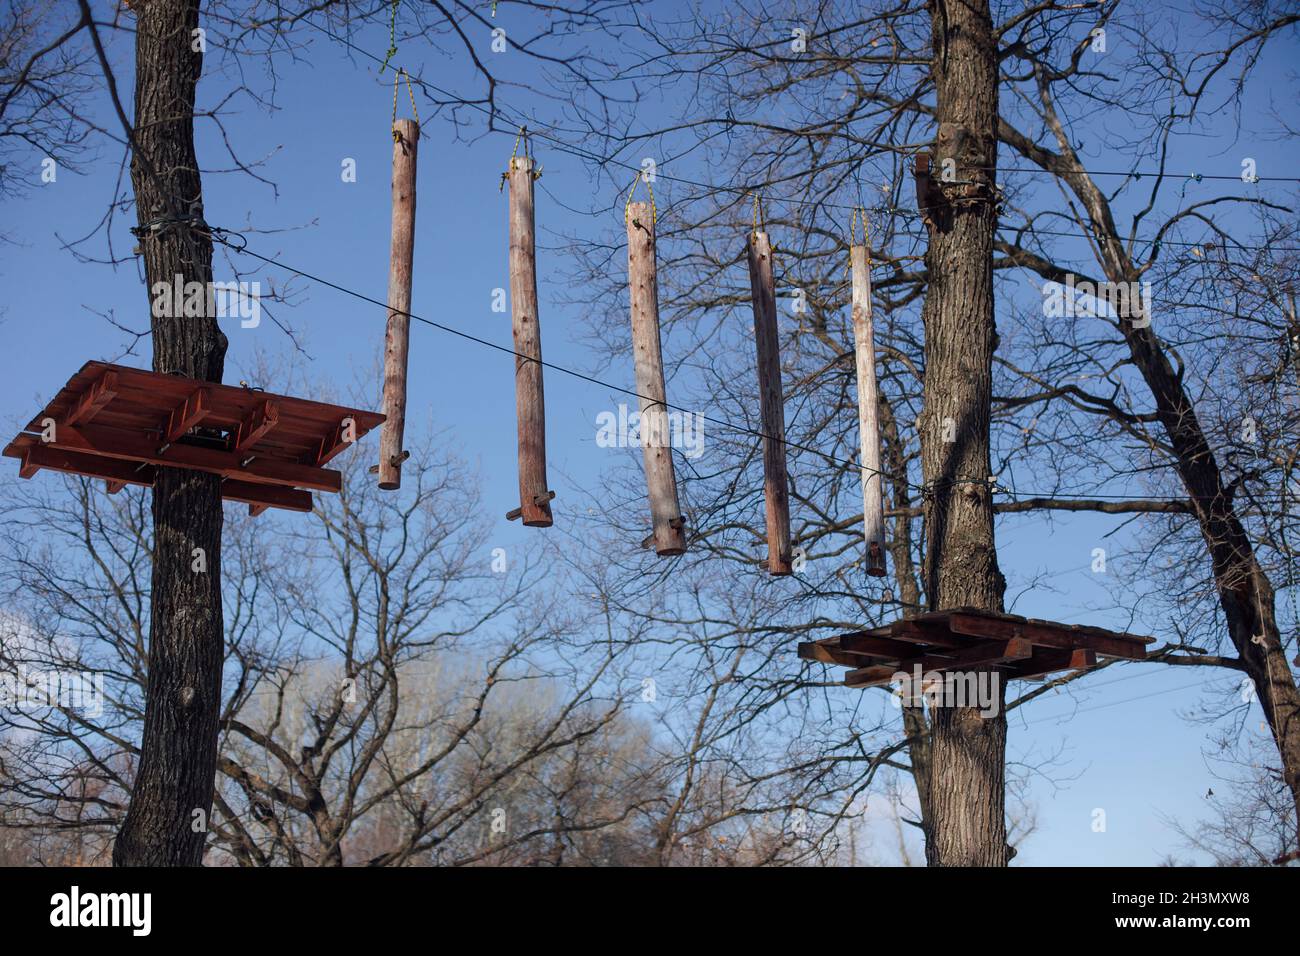 Children's attraction in forest. Wooden suspension bridge between trees, attached sticks on tree for signal Stock Photo